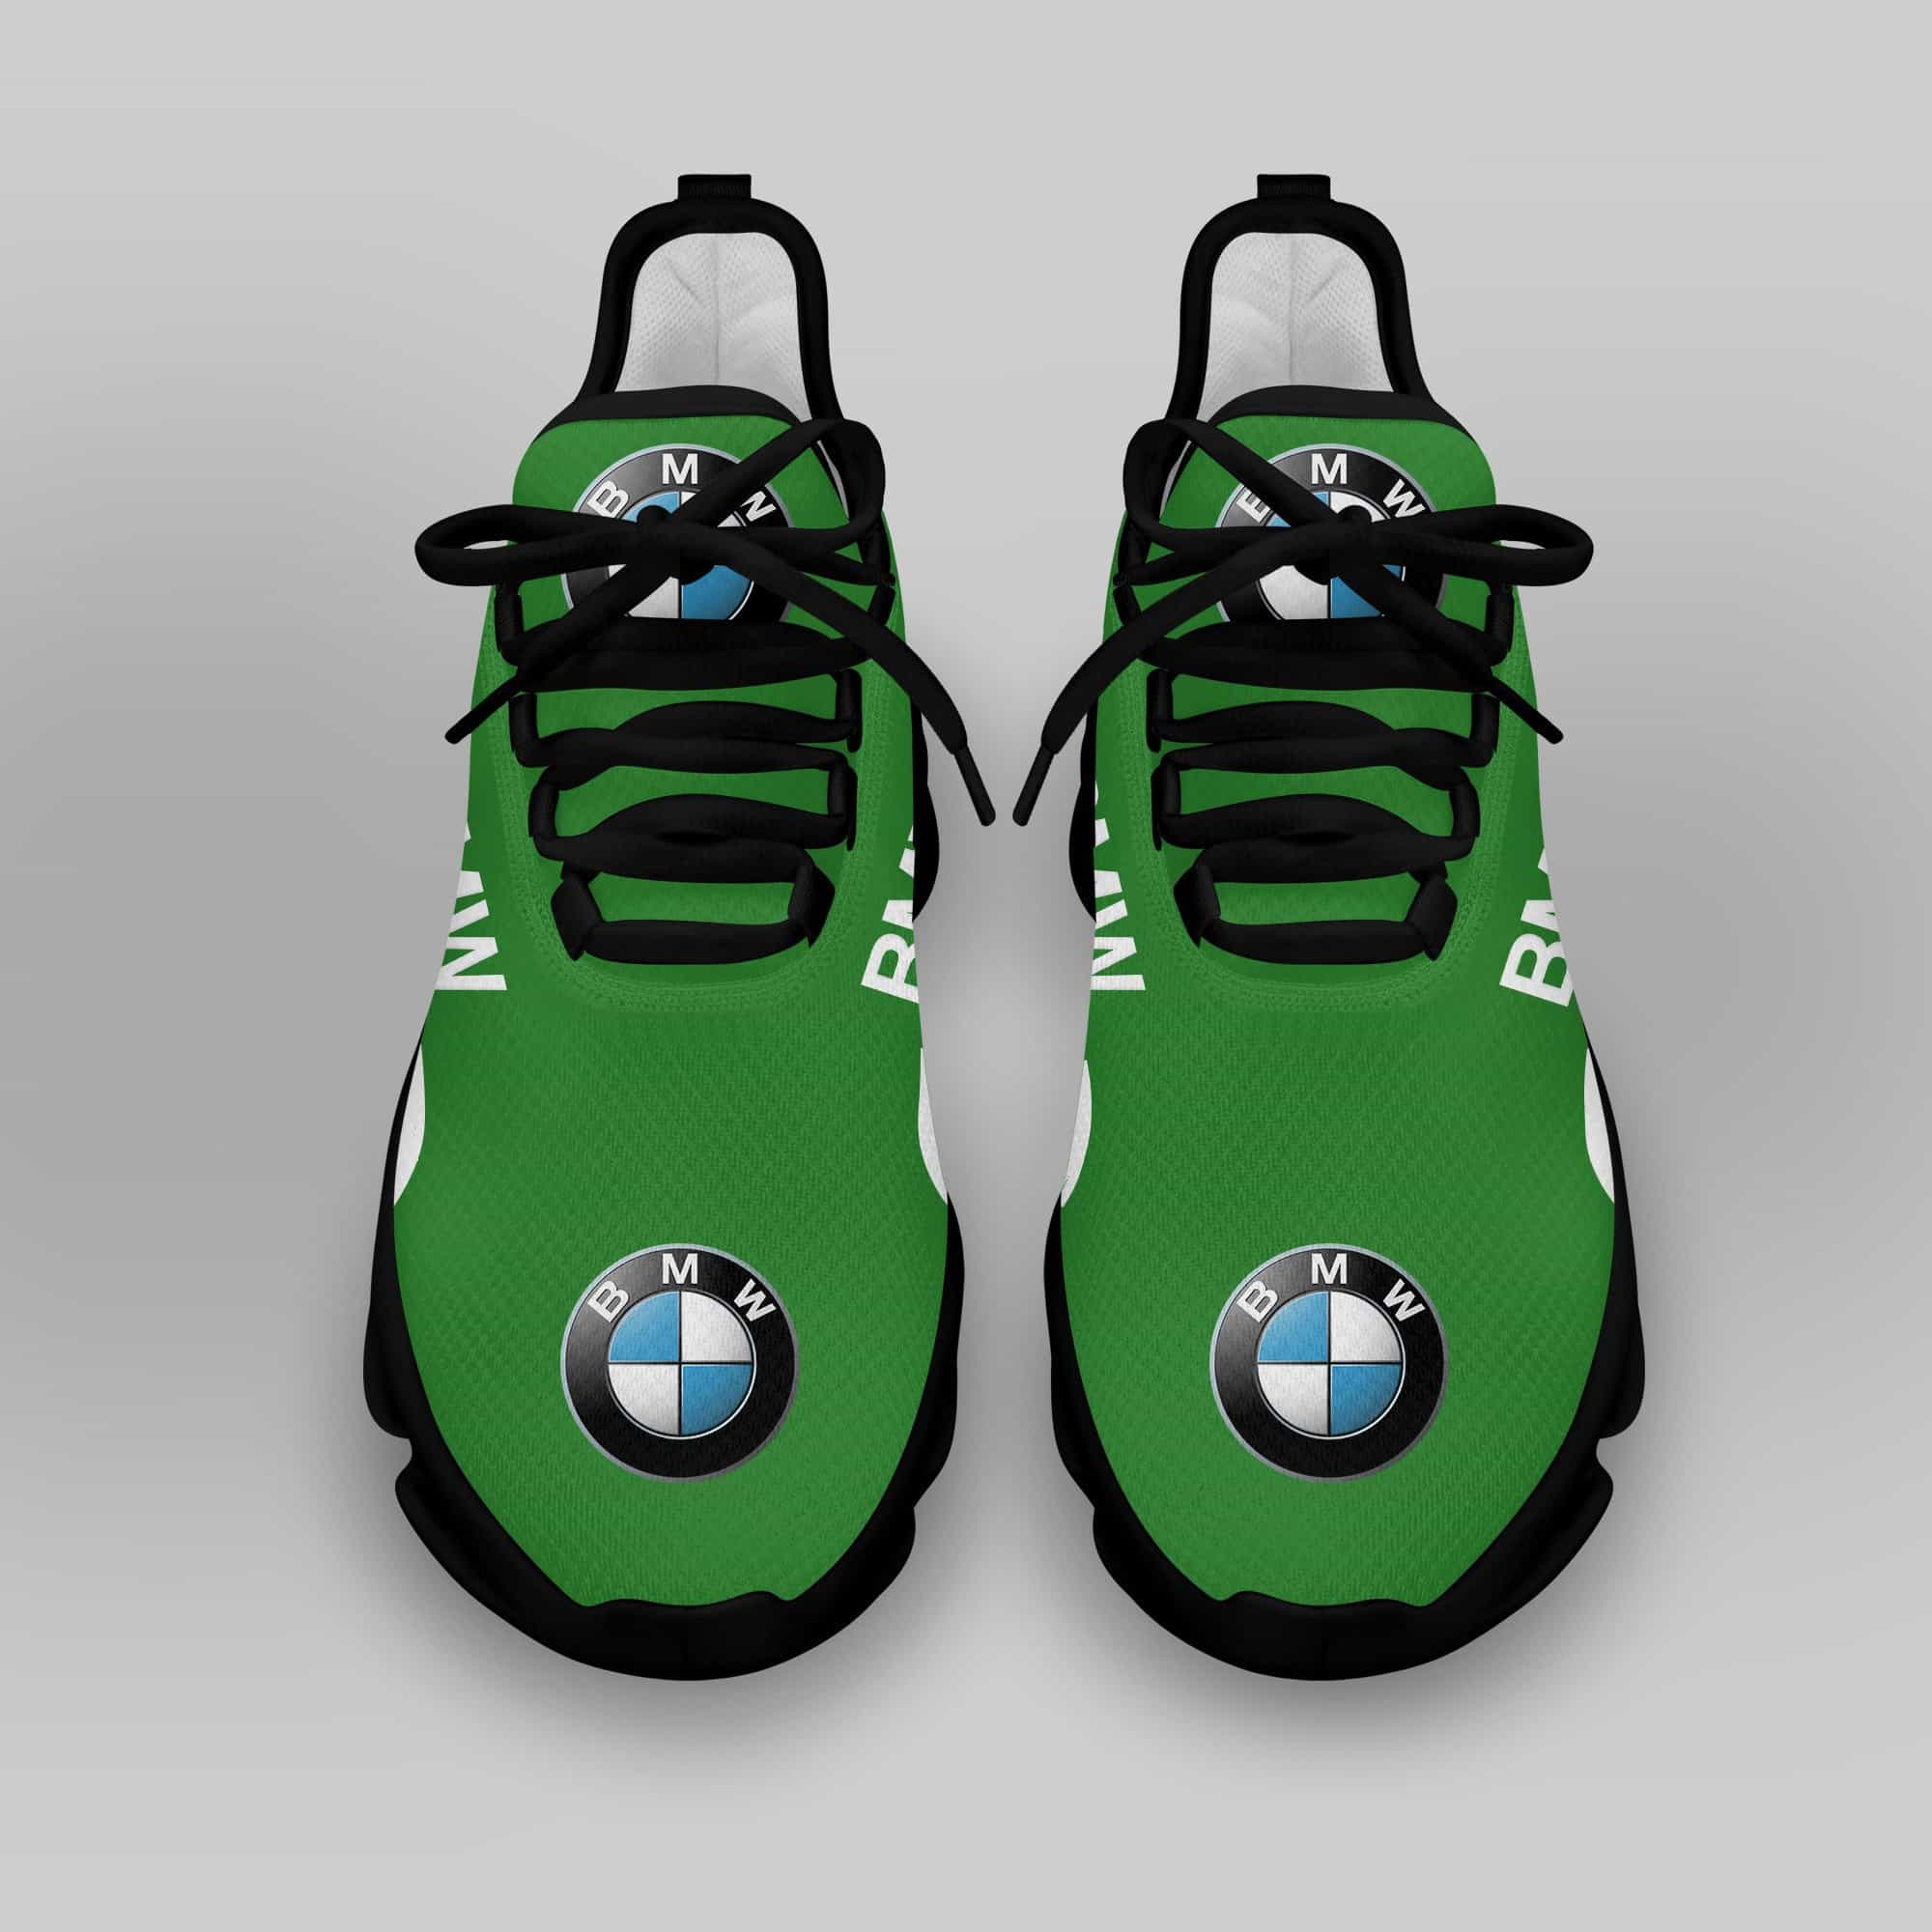 Bmw Running Shoes Max Soul Shoes Sneakers Ver 54 4